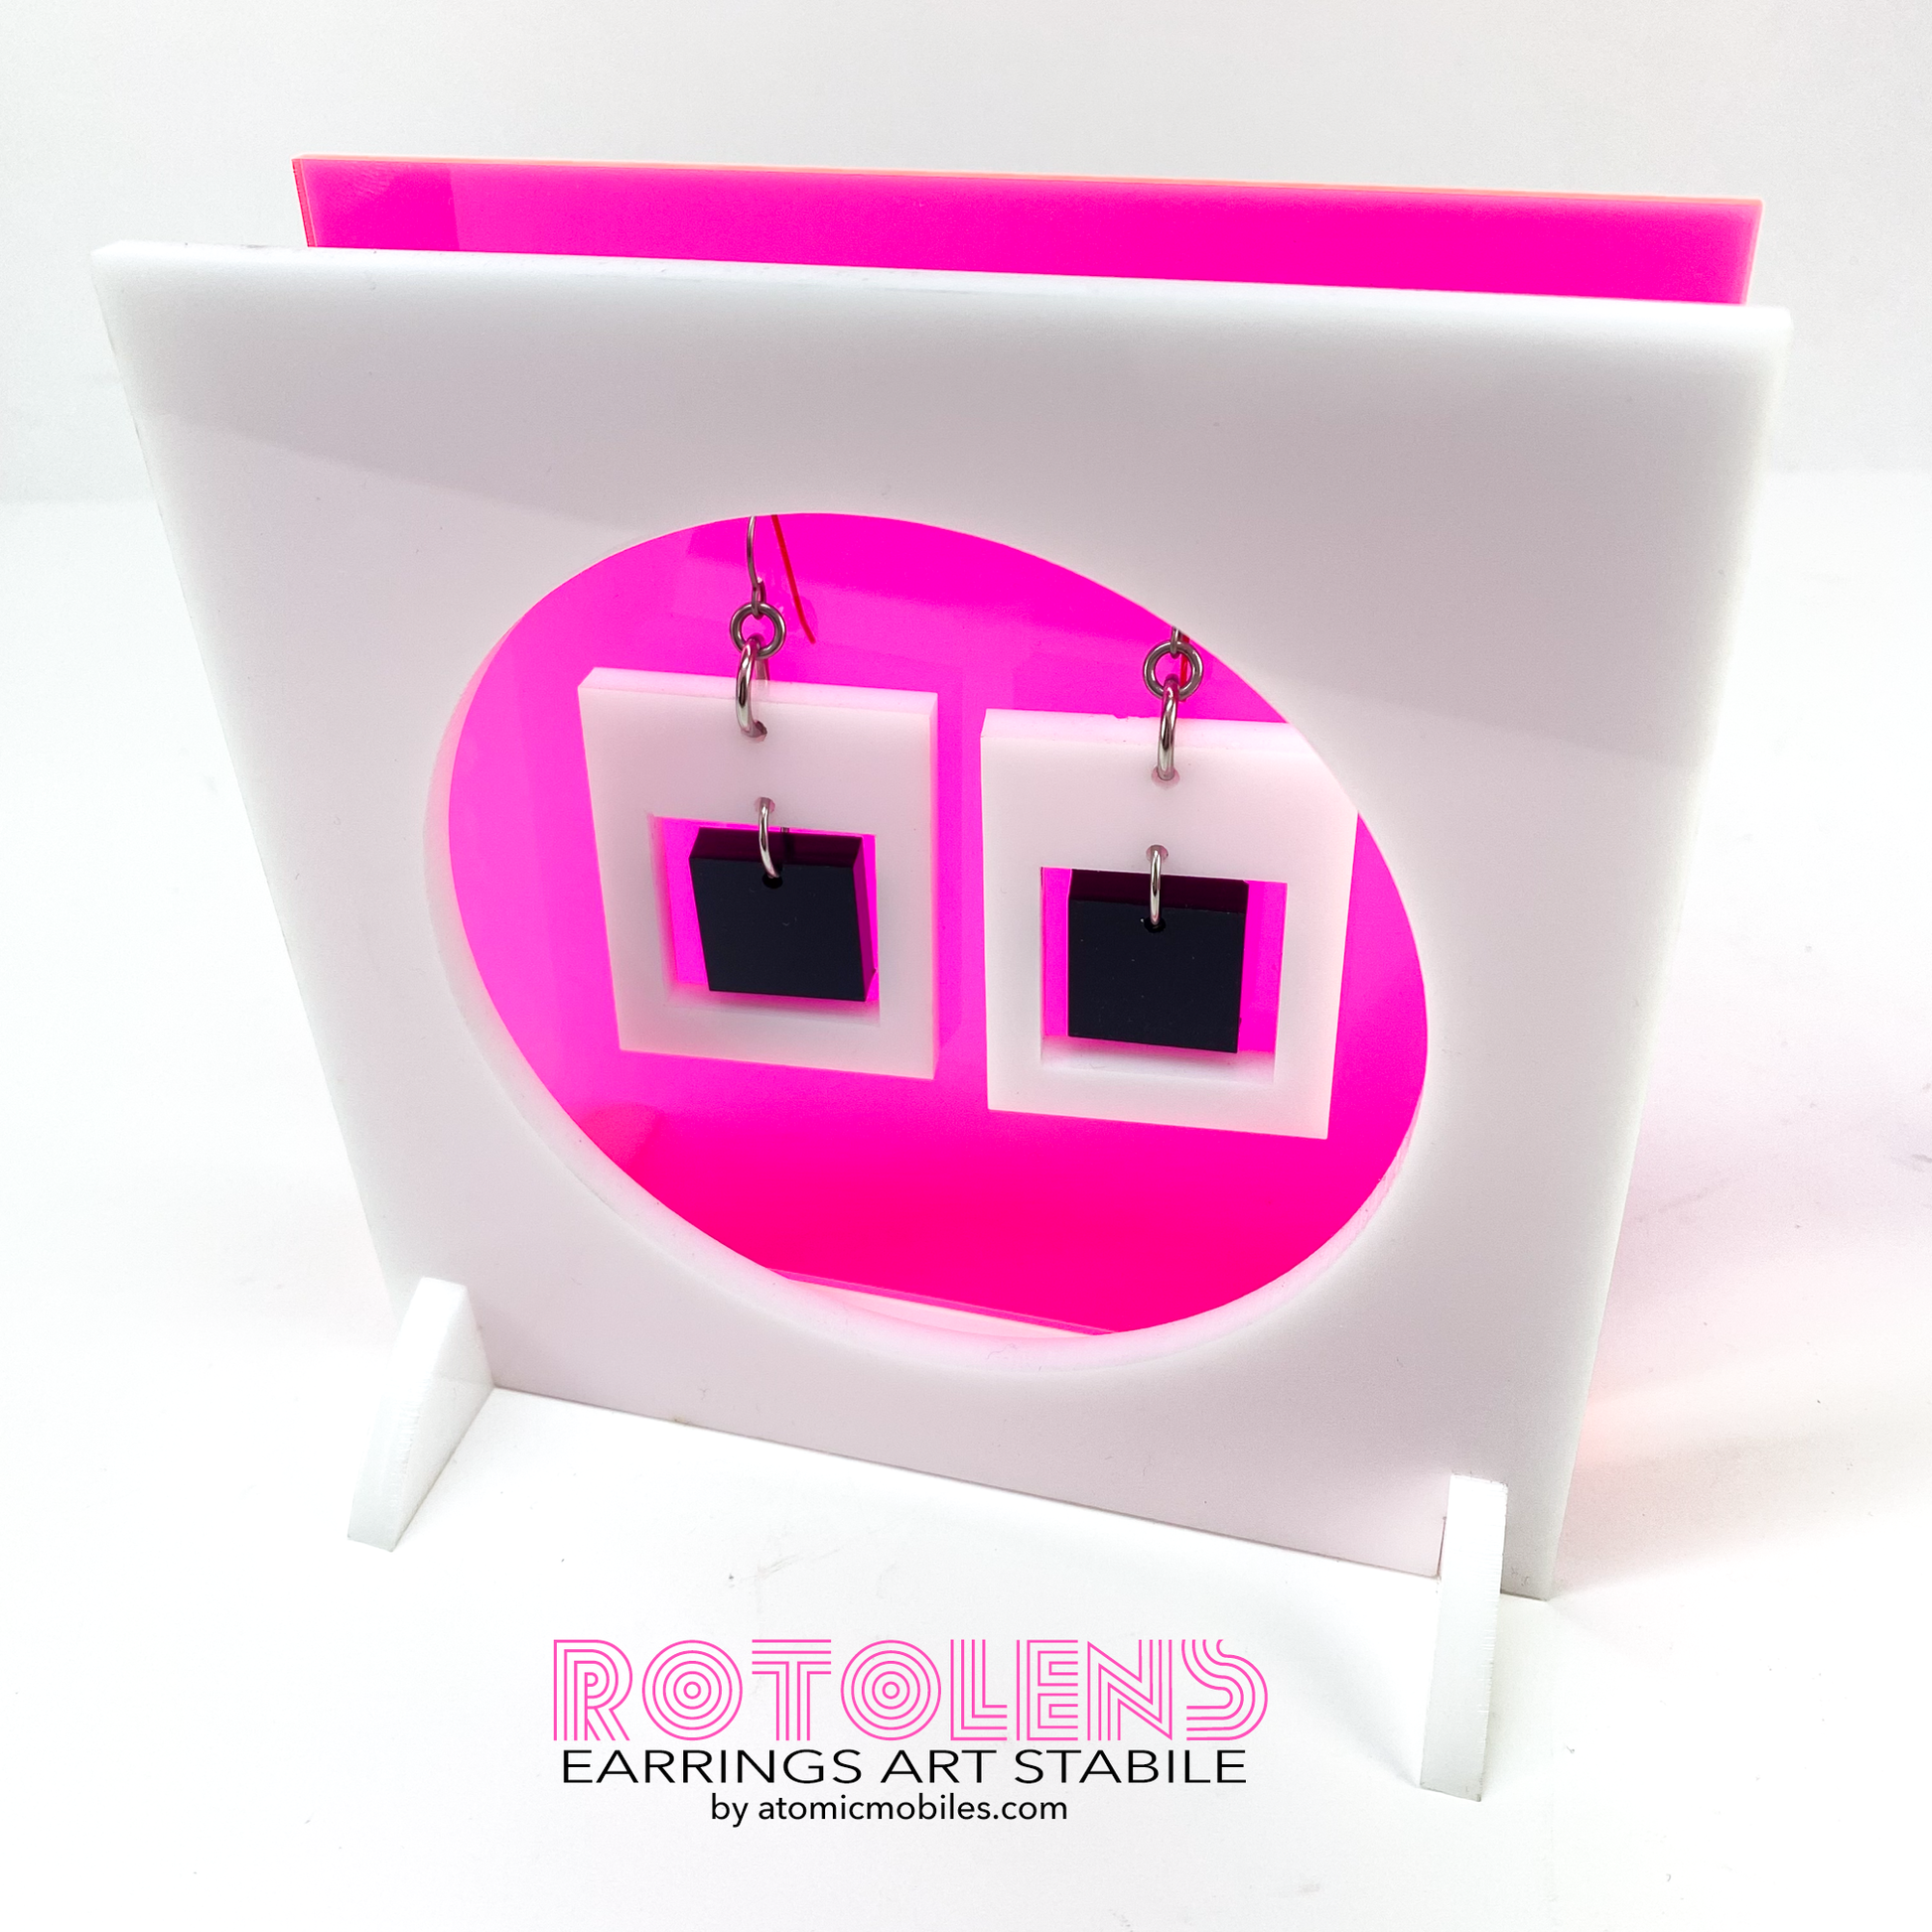 Stunning Art Earrings Stabile Set featuring transparent neon pink backing with white and black earrings - mid century modern art for Groovy People by AtomicMobiles.com